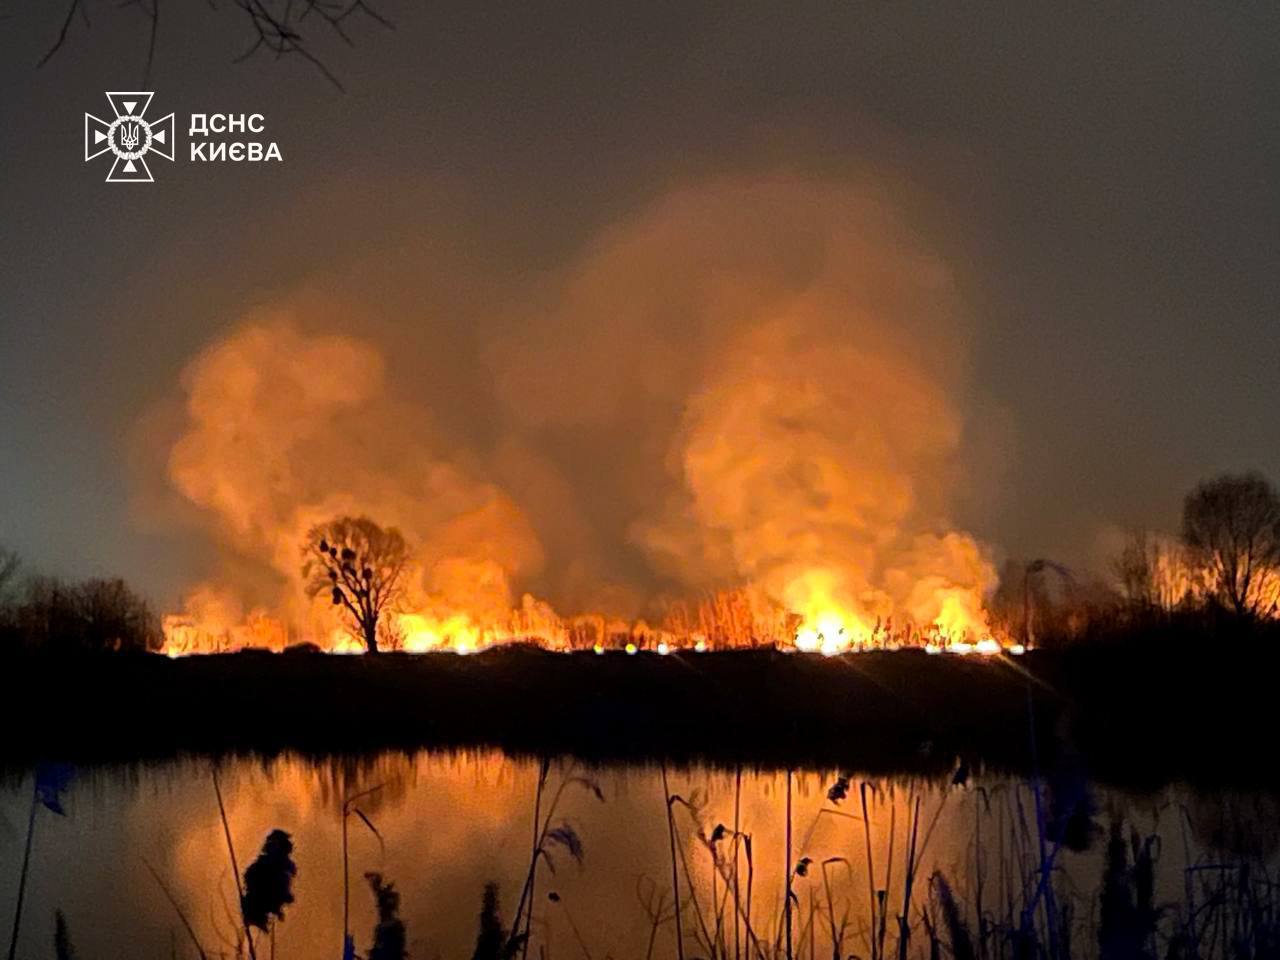 Police launch investigation into suspected arson at Kyiv wetland park